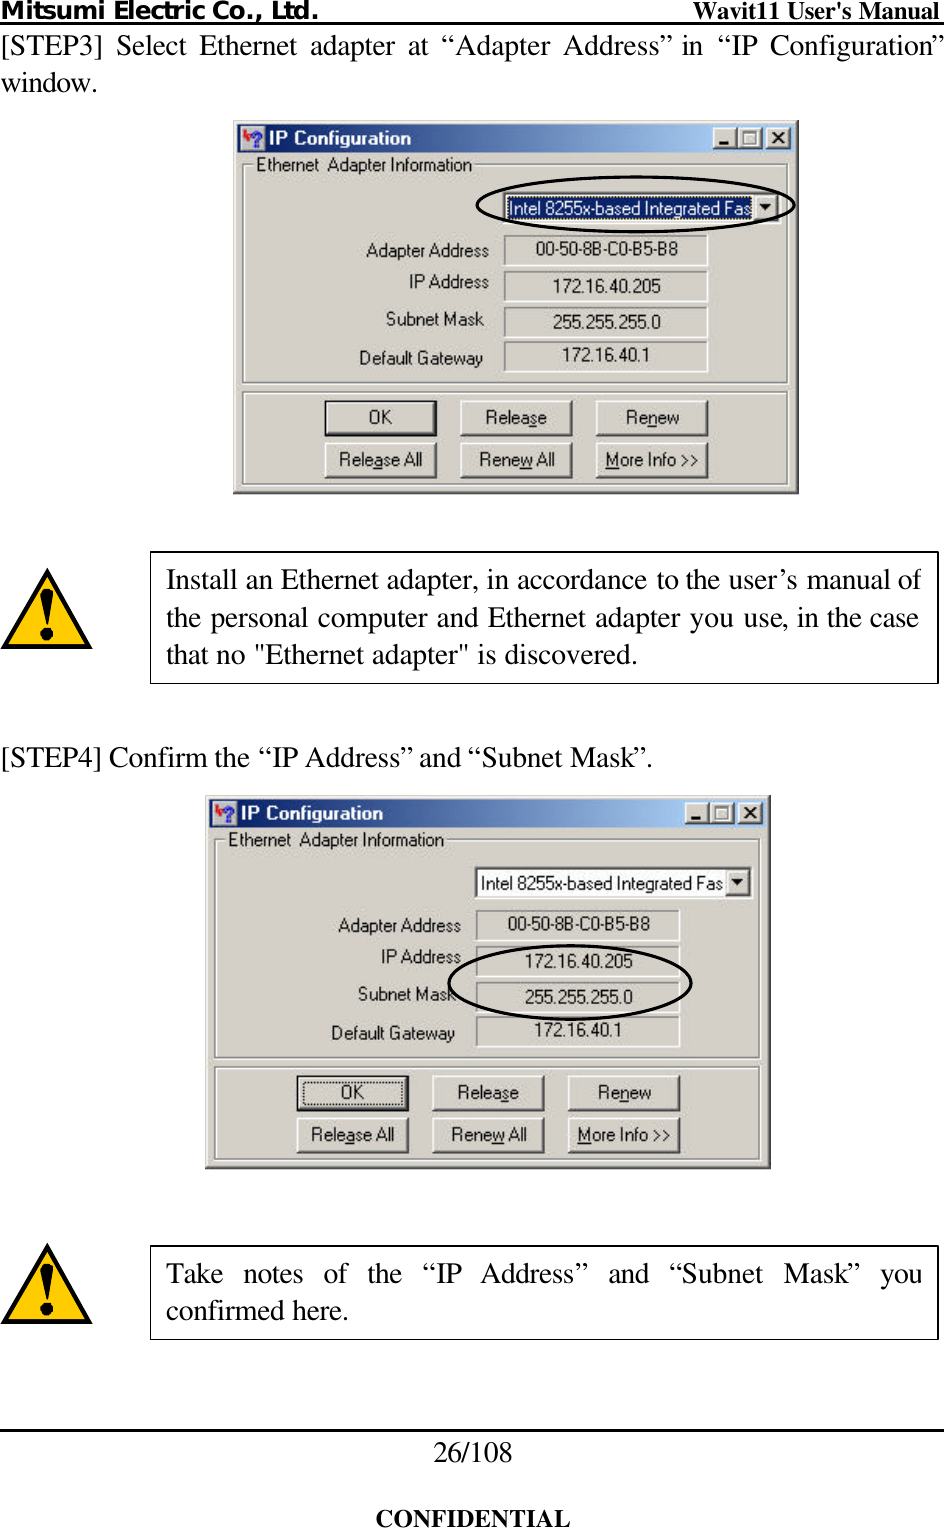 Mitsumi Electric Co., Ltd.                              Wavit11 User&apos;s Manual 26/108  CONFIDENTIAL [STEP3]  Select Ethernet adapter at “Adapter Address” in  “IP Configuration” window.       [STEP4] Confirm the “IP Address” and “Subnet Mask”.       Install an Ethernet adapter, in accordance to the user’s manual of the personal computer and Ethernet adapter you use, in the case that no &quot;Ethernet adapter&quot; is discovered. Take notes of the “IP Address” and “Subnet Mask” you confirmed here. 